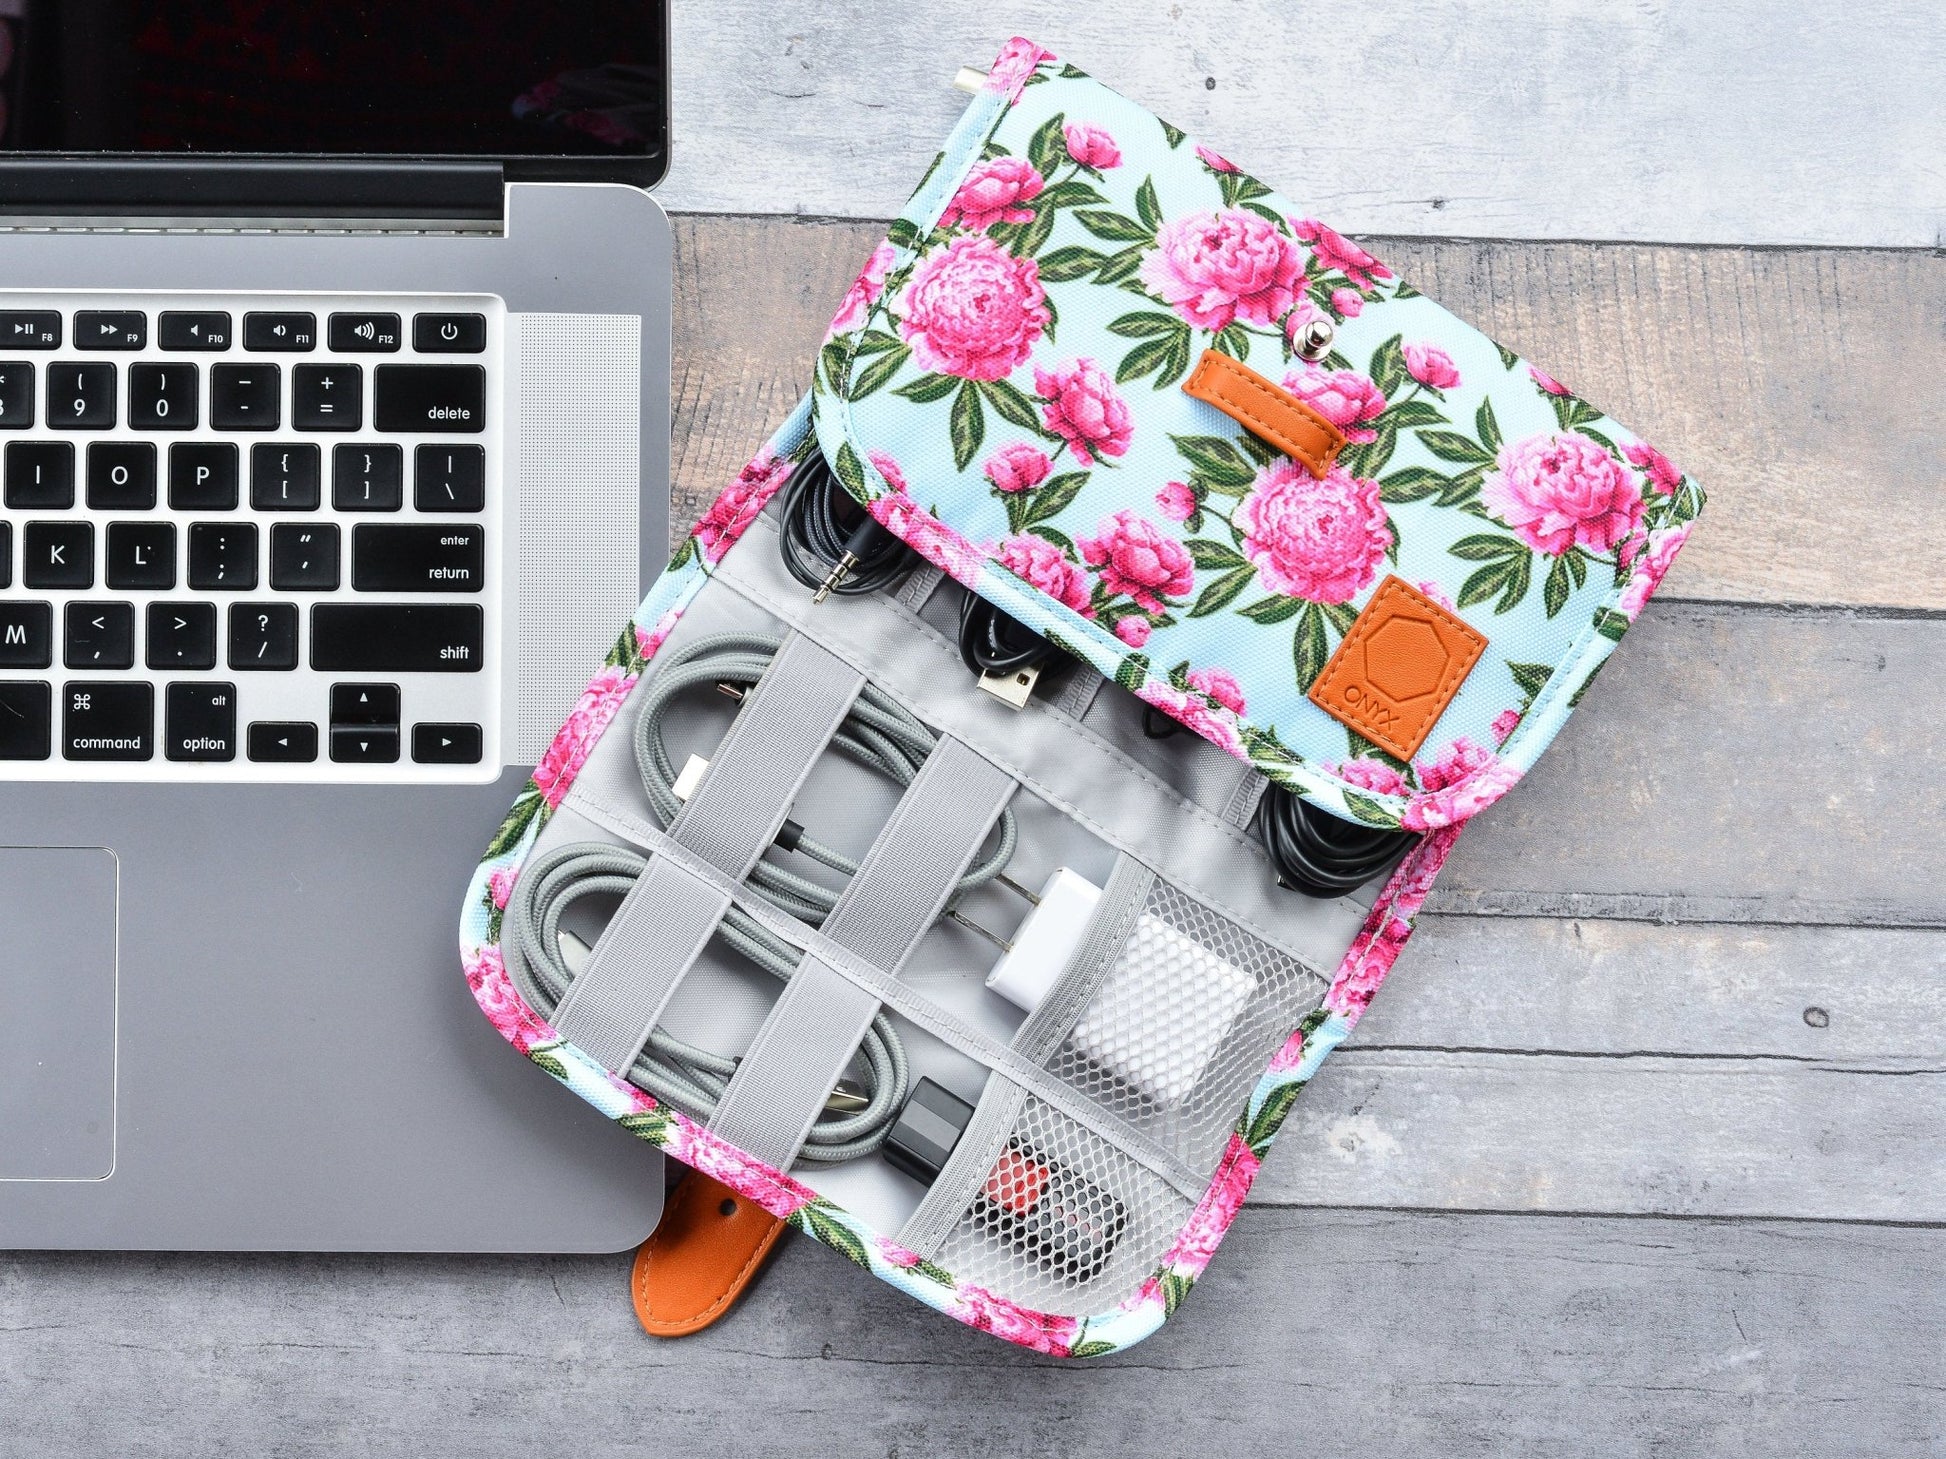 Olive, Blue, & Floral Electronics Organizer Bag – Portable Travel Accessories Case for Chargers, Cords, Cables, Batteries and More!